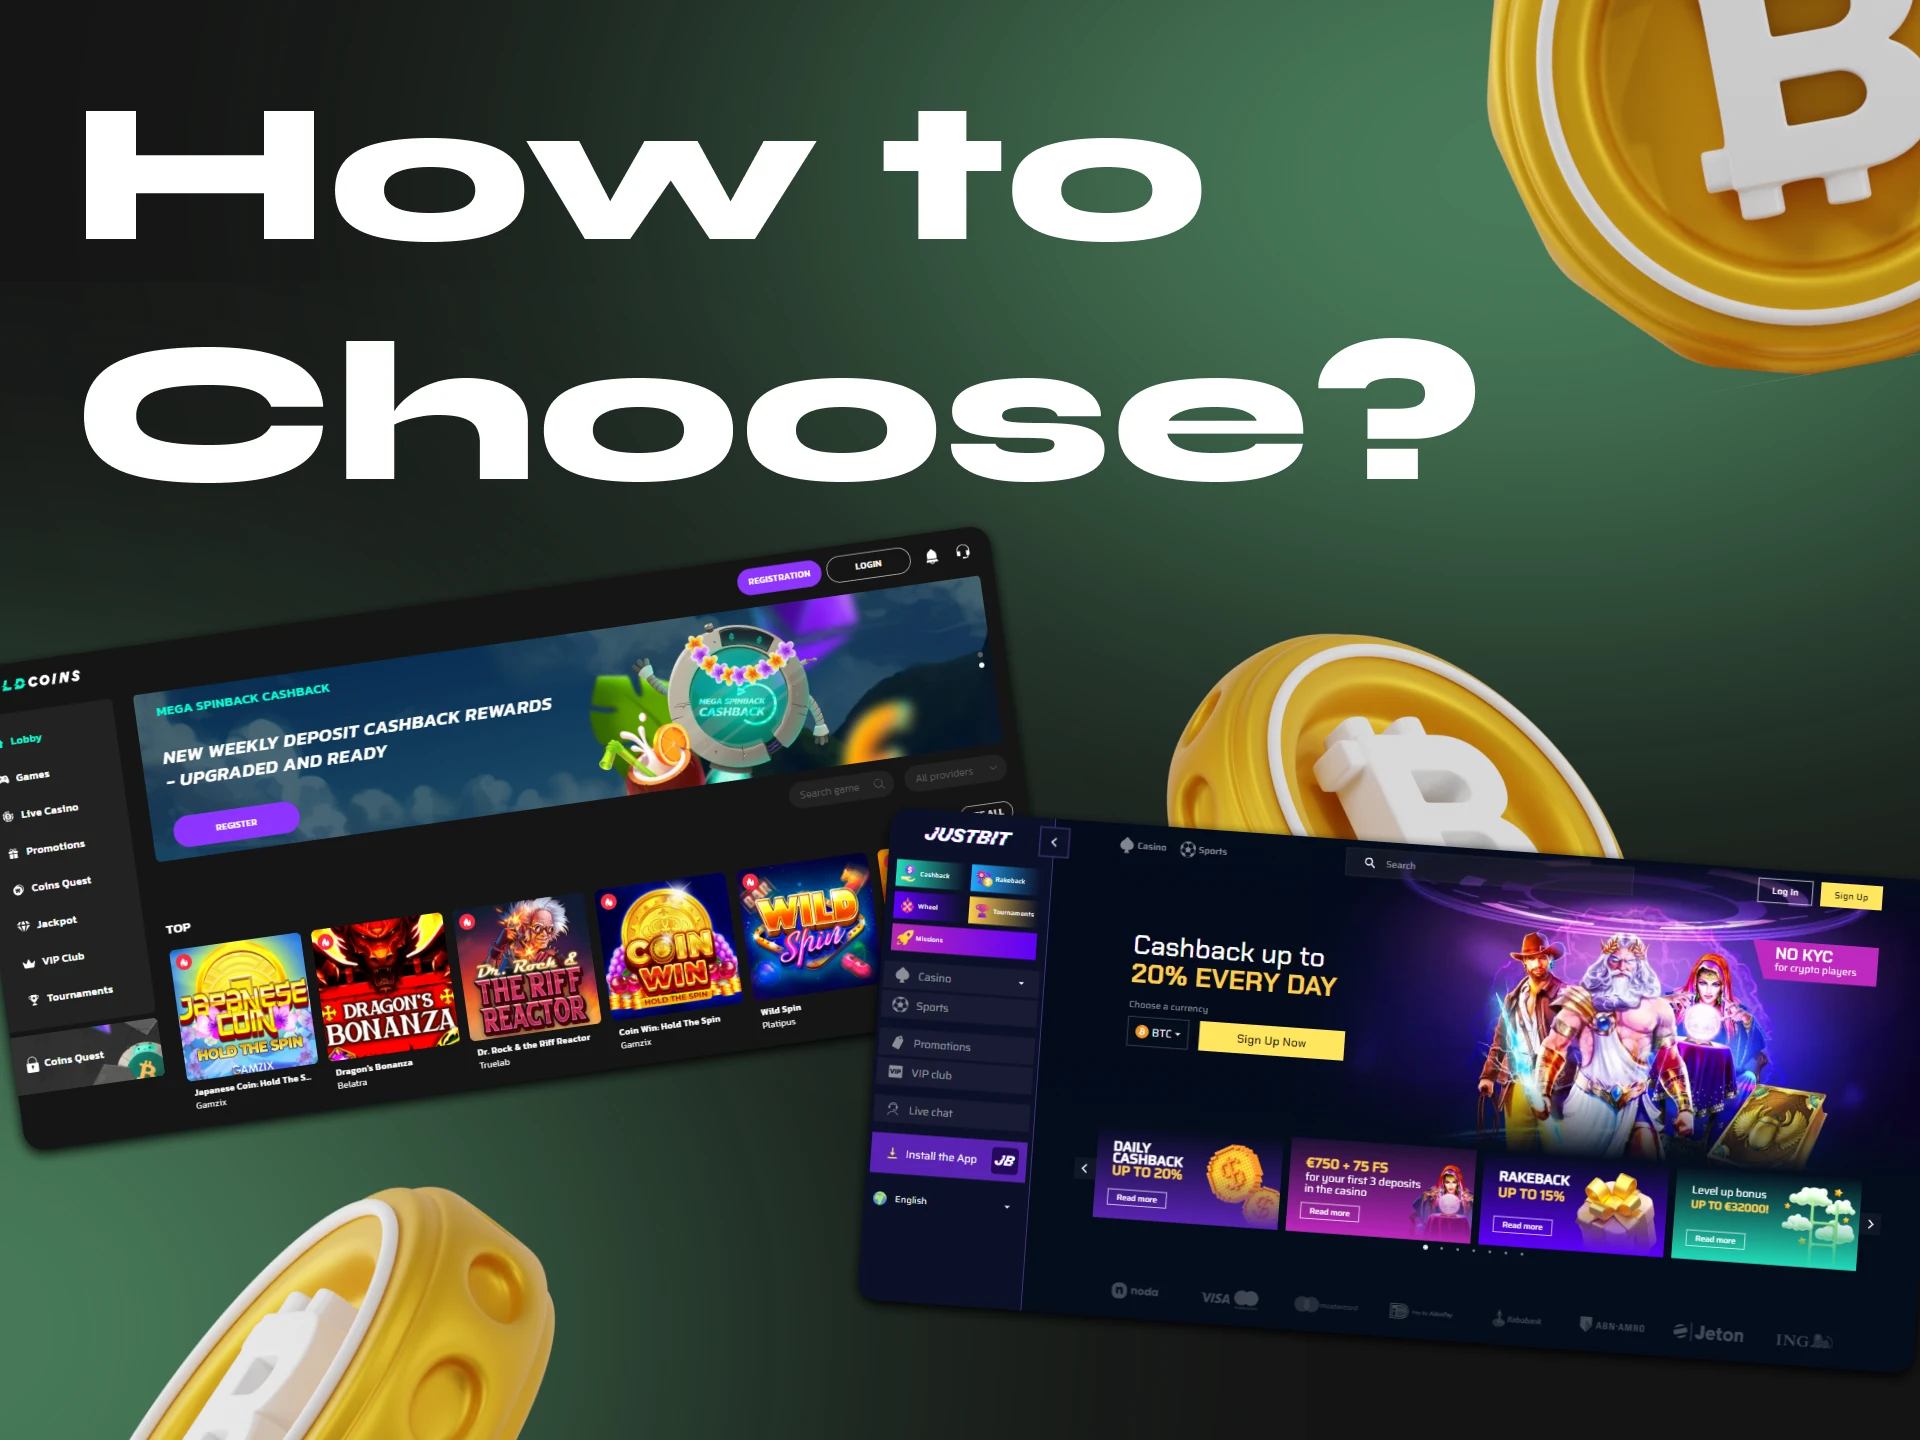 Find out how to choose the crypto casino that's right for you.